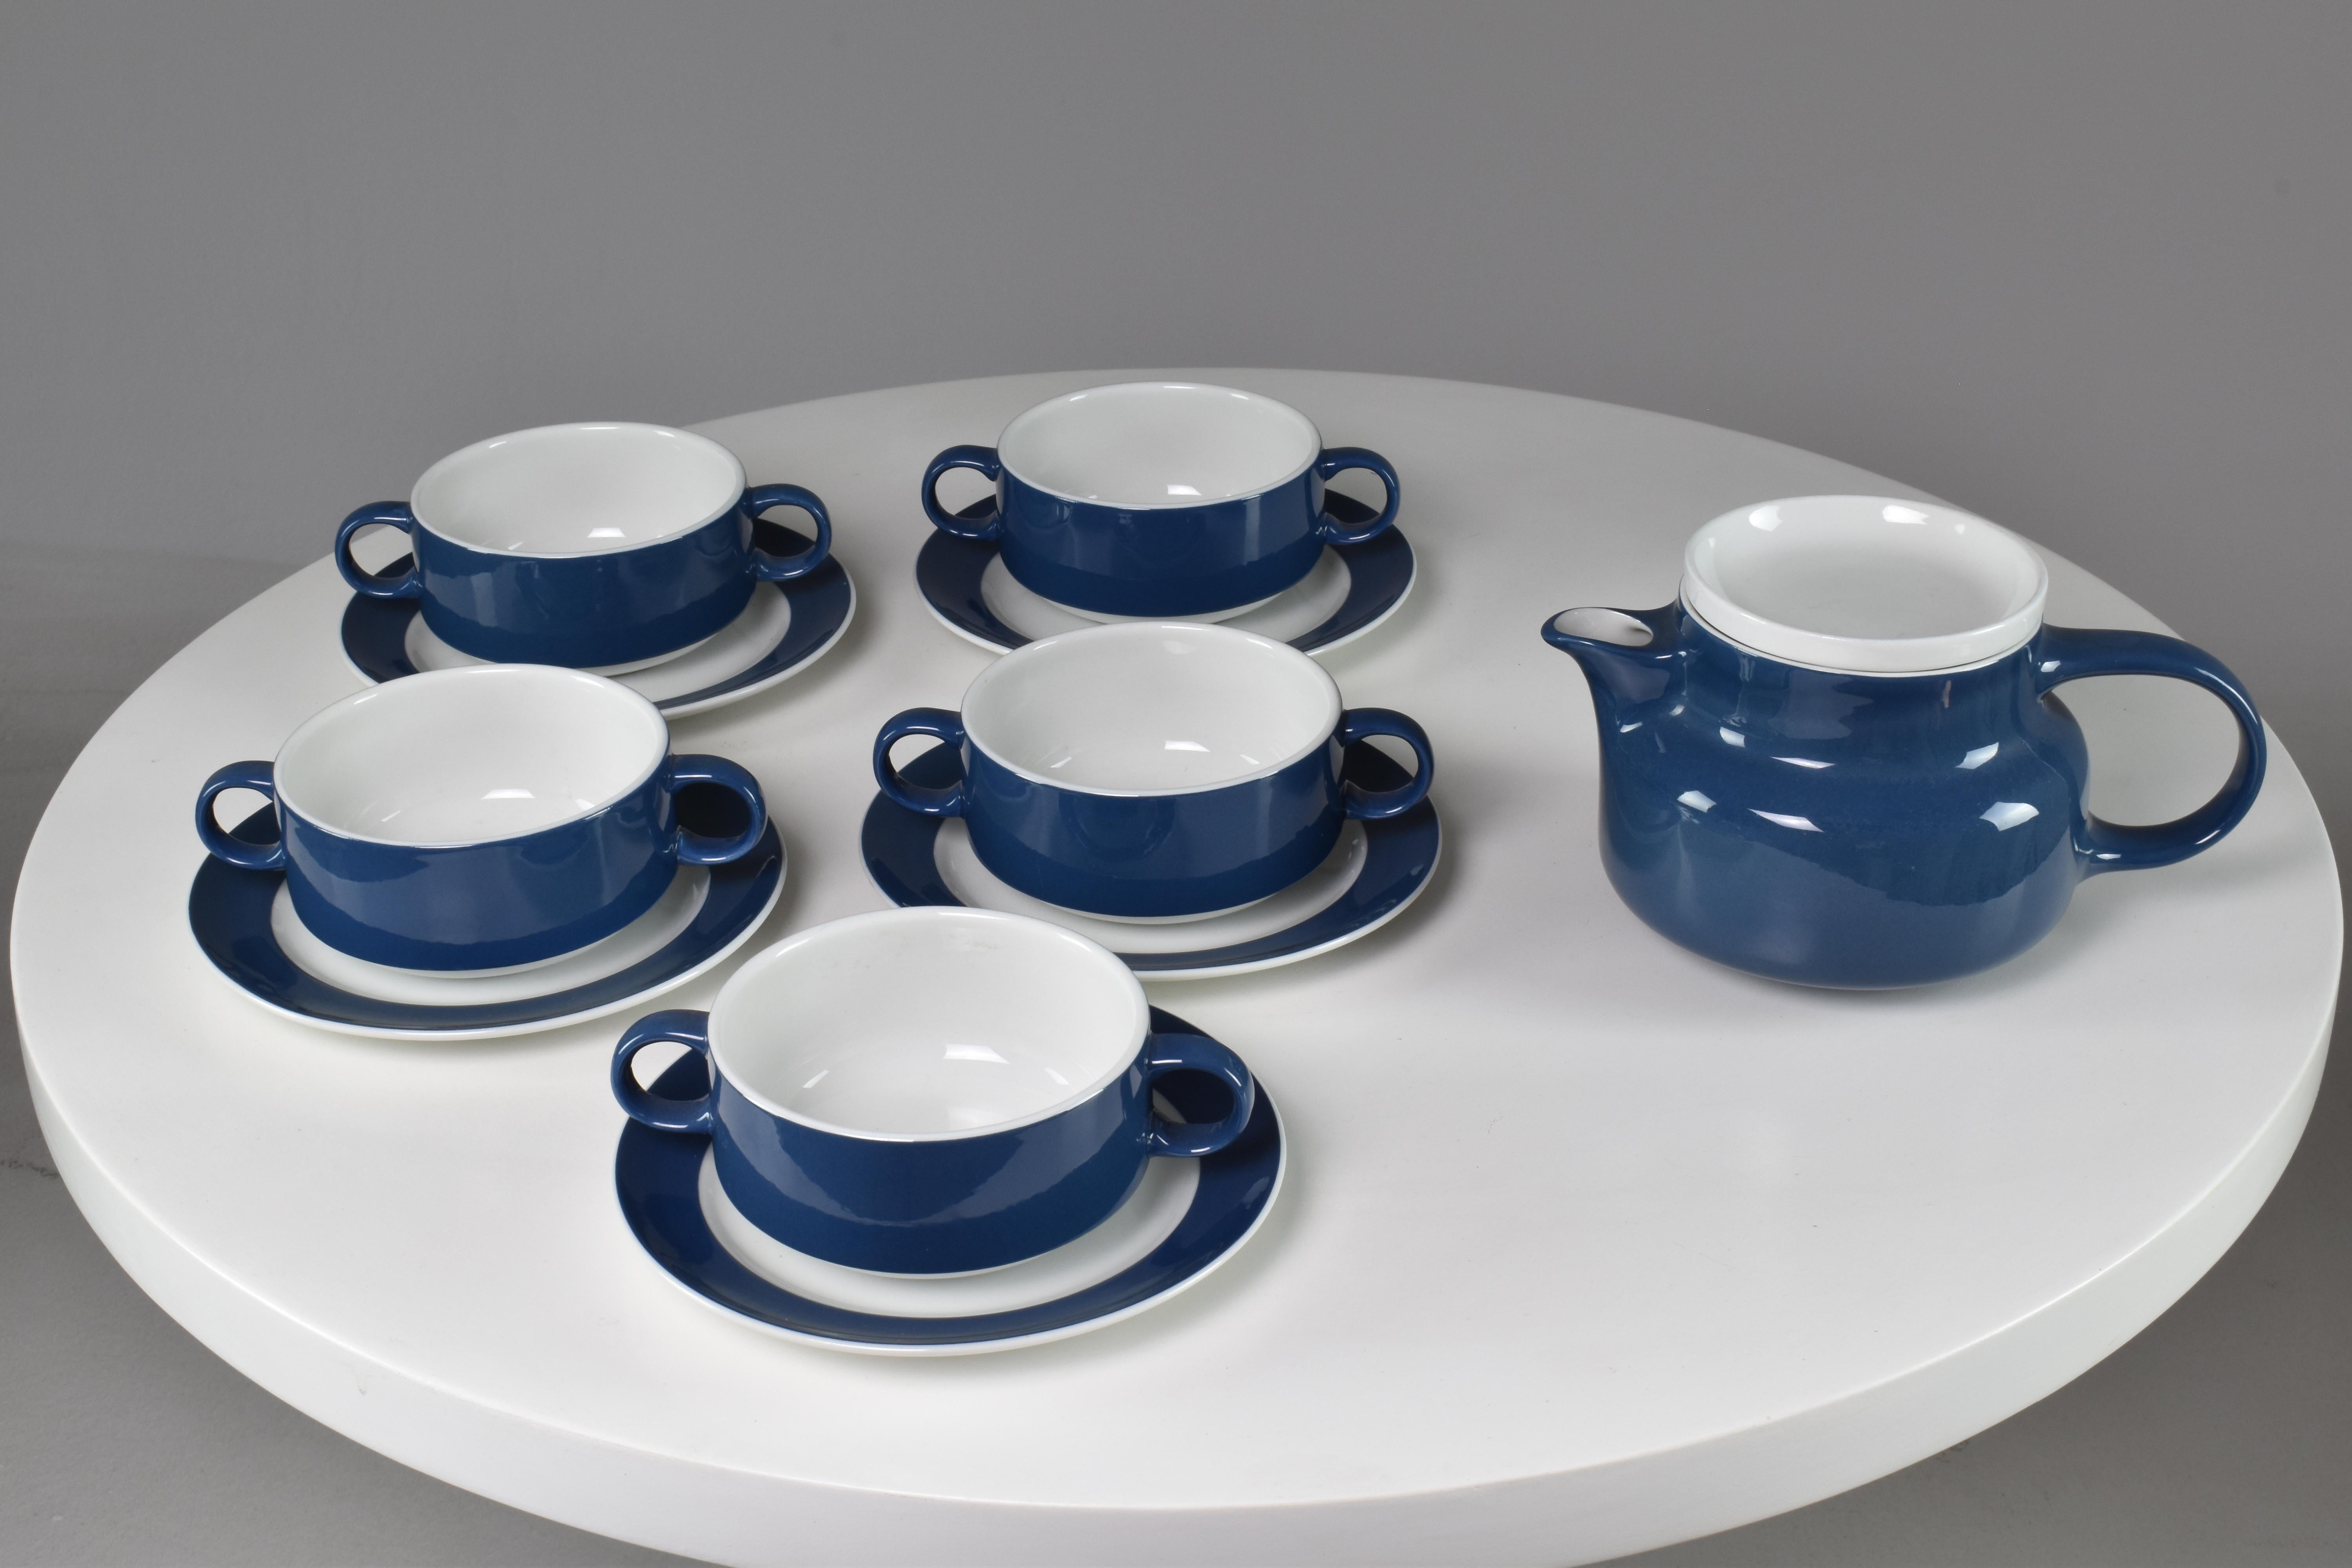 A fantastic collectable tea or coffee set of 5 Italian blue and white porcelain tea or coffee cups with saucers and a teapot signed Richard Ginori from the 1970s. They brilliantly pile up on top of each other and on top of the teapot alining